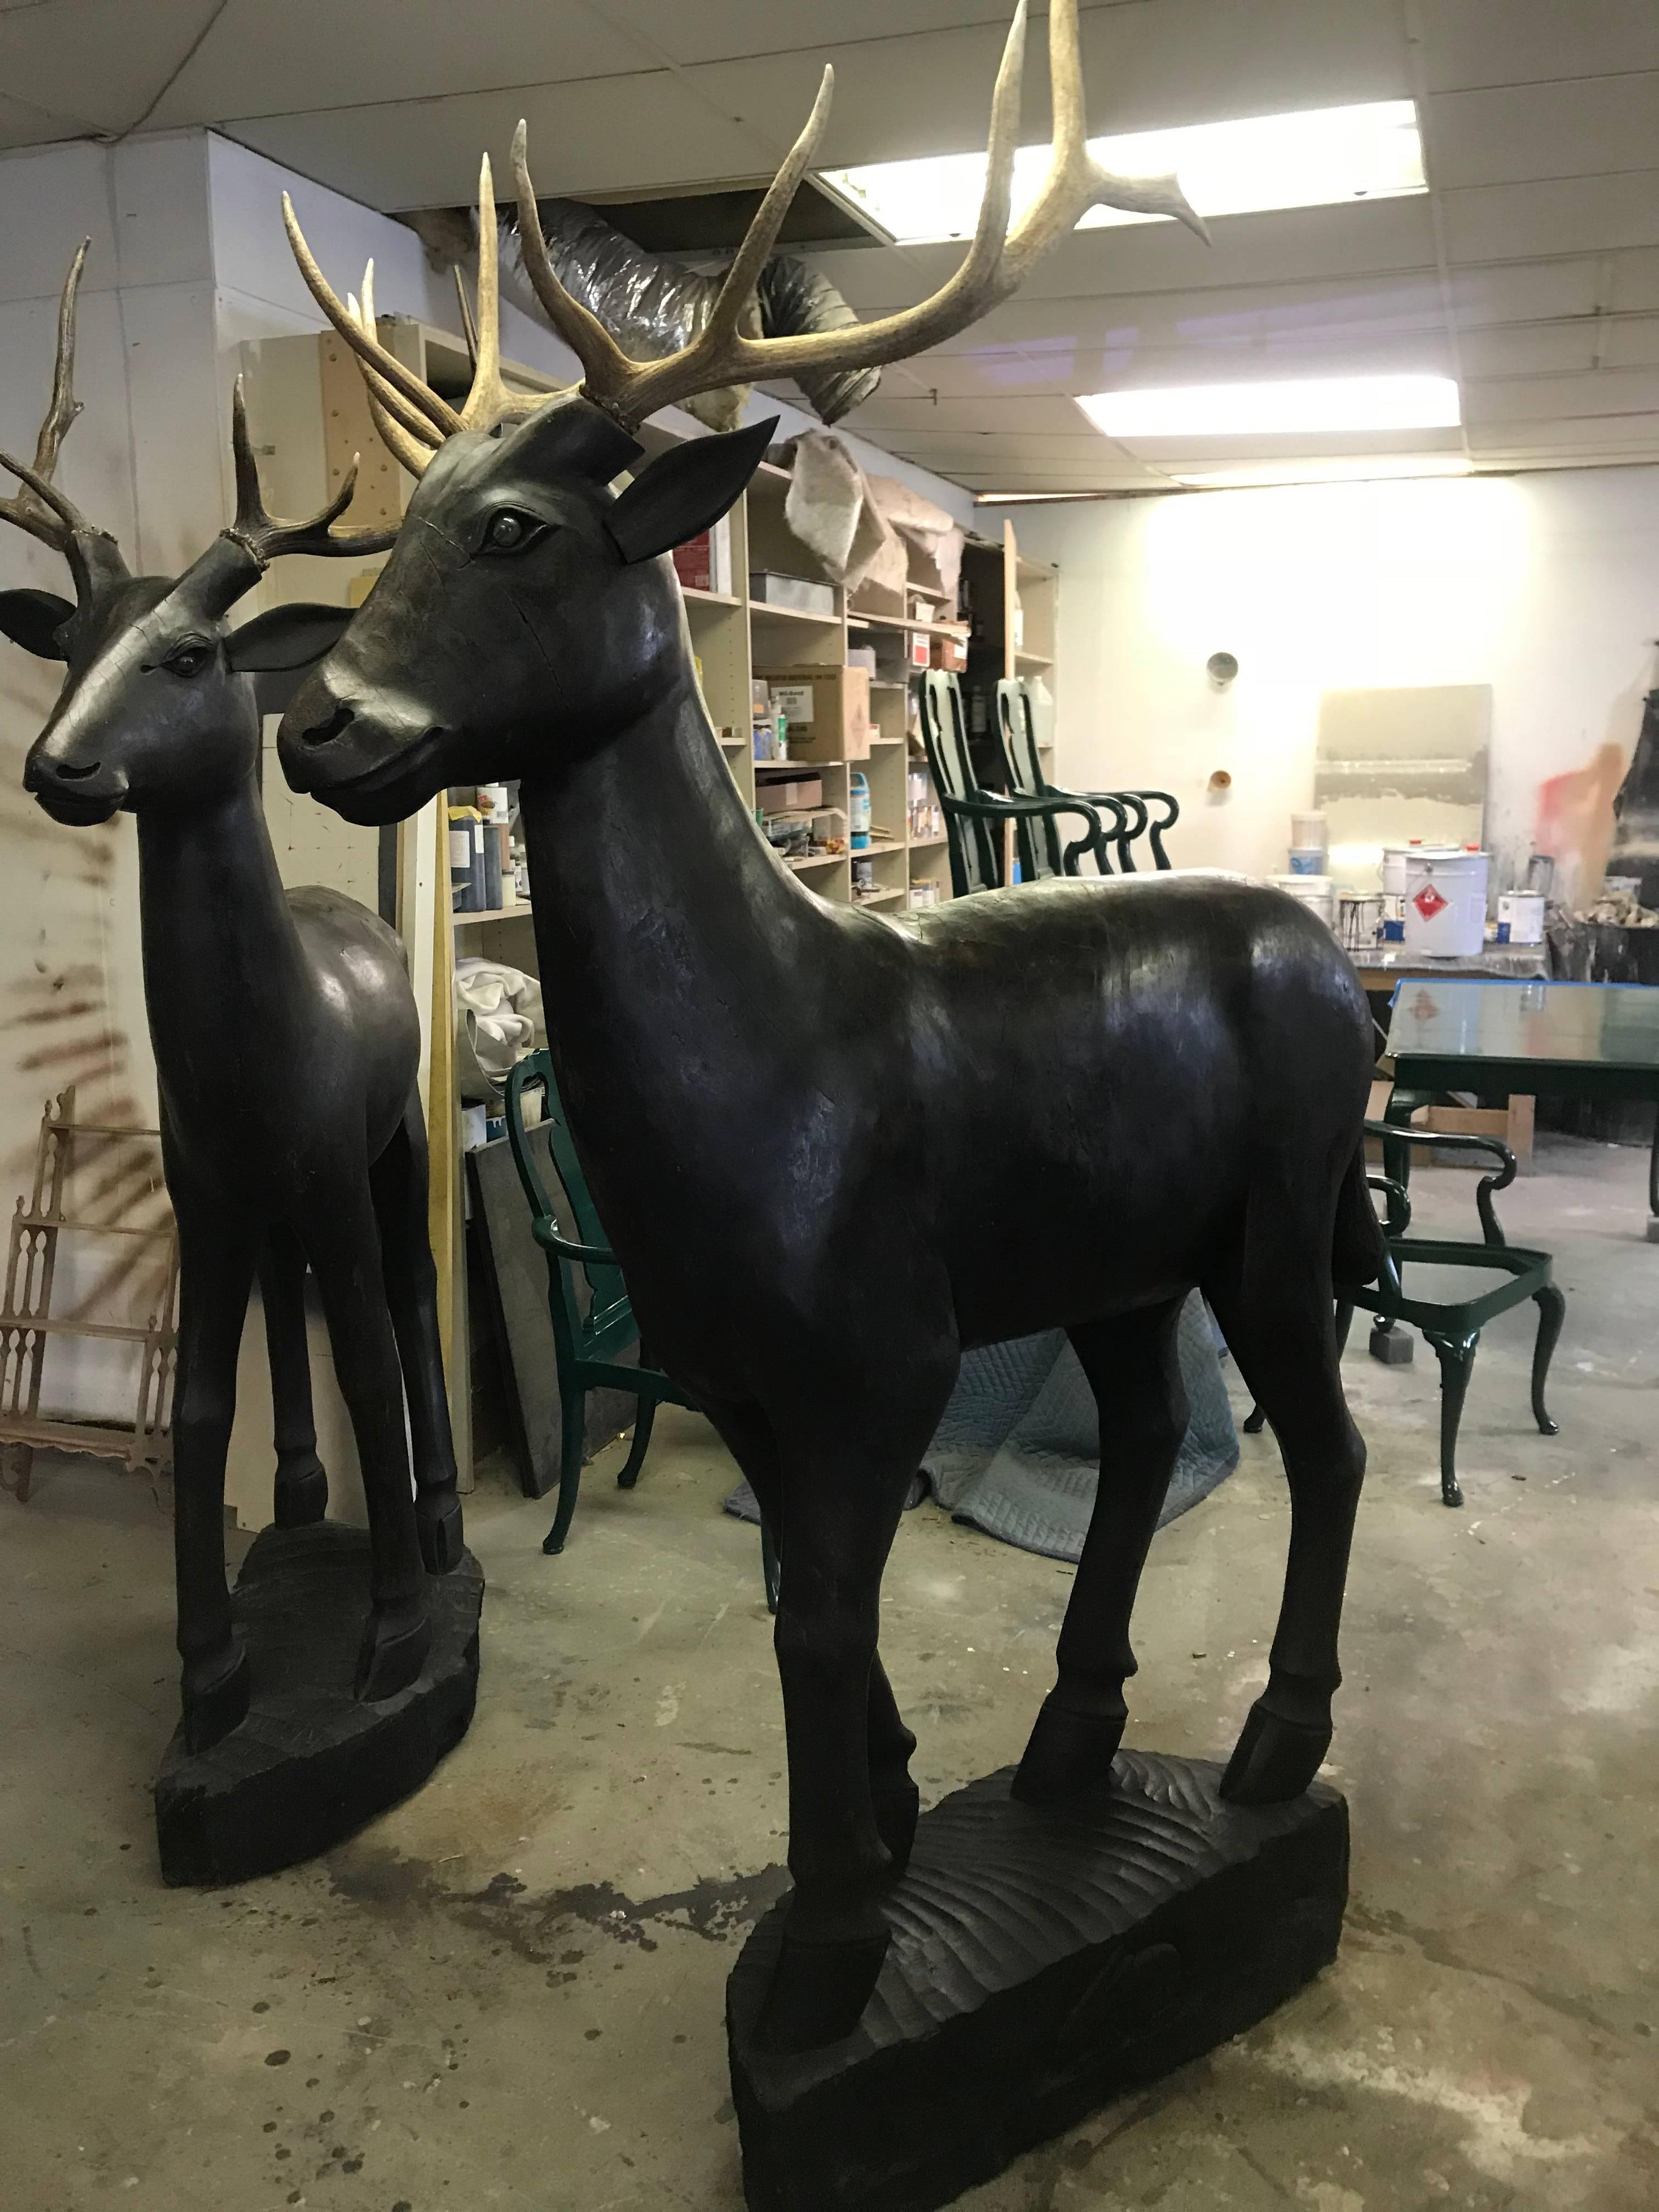 Pair of 20th century carved wooden Folk Art style deer. Appear to be carved from 1 large piece of wood. Deer are topped with removable elk antlers. Both have checks and cracks due to being exposed to weather which adds to the wonderful Primitive